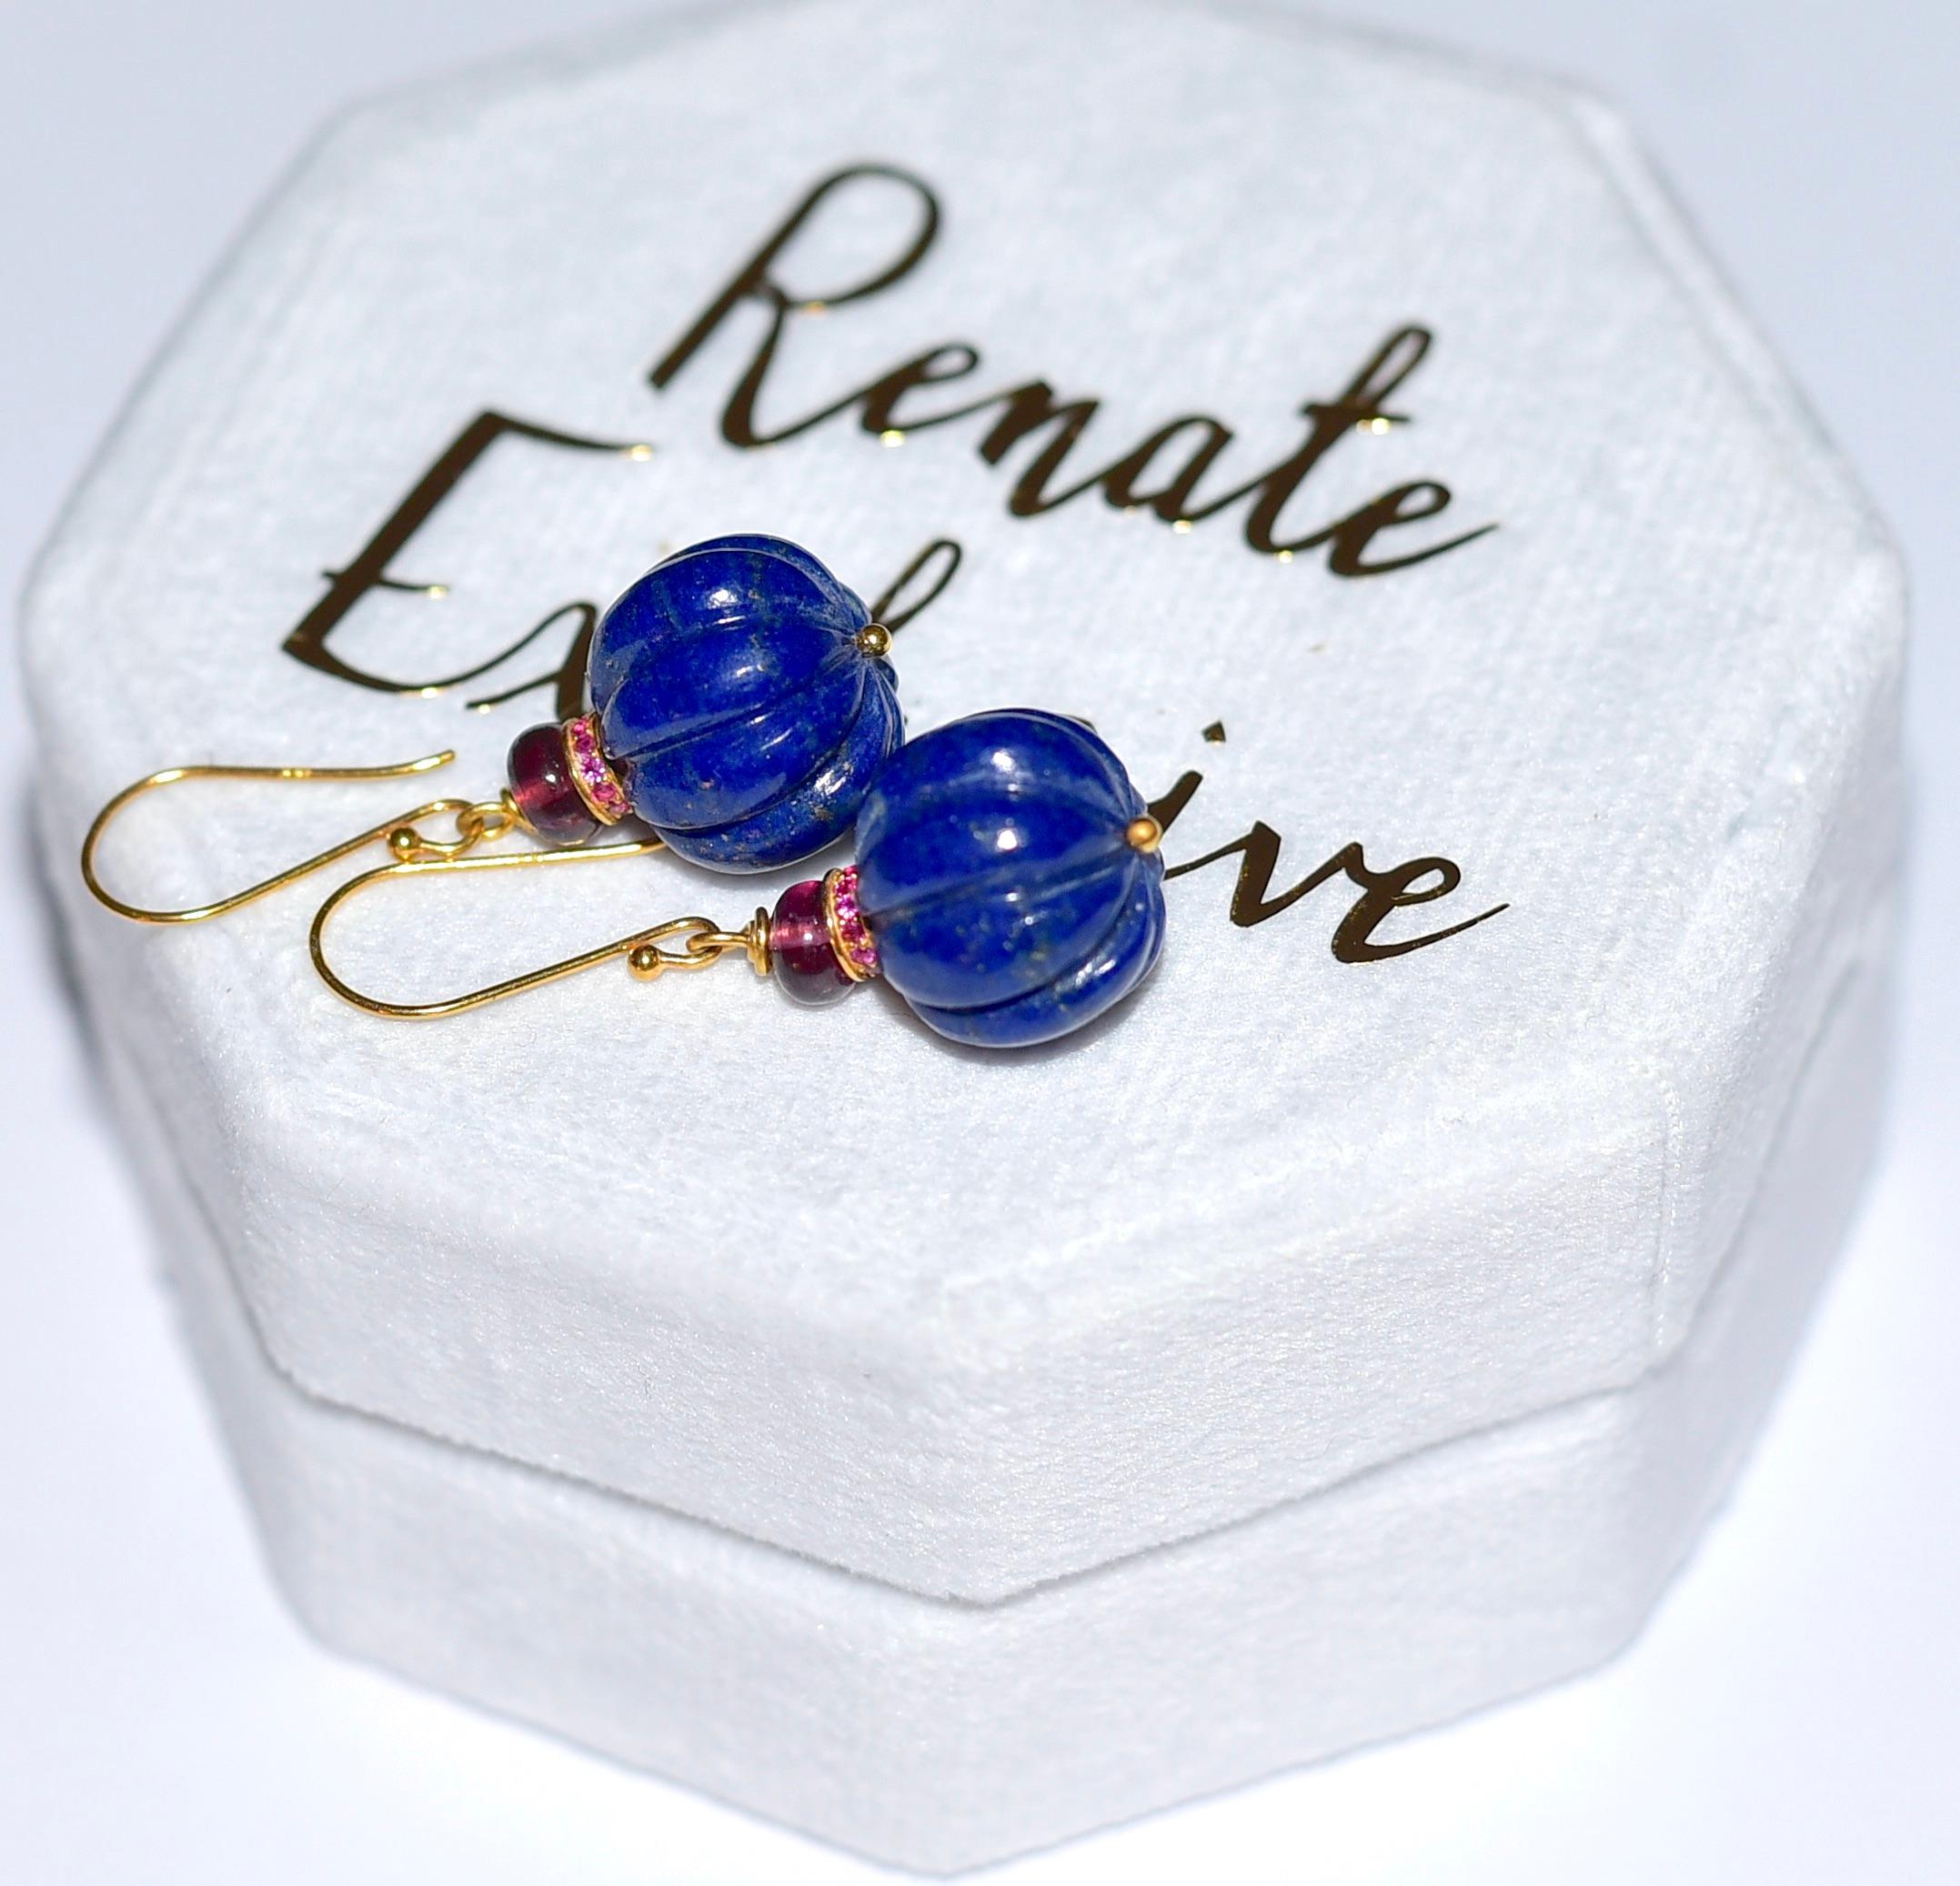 Modern Afghani Lapis Lazuli and Ruby Earrings in 18K Solid yellow Gold